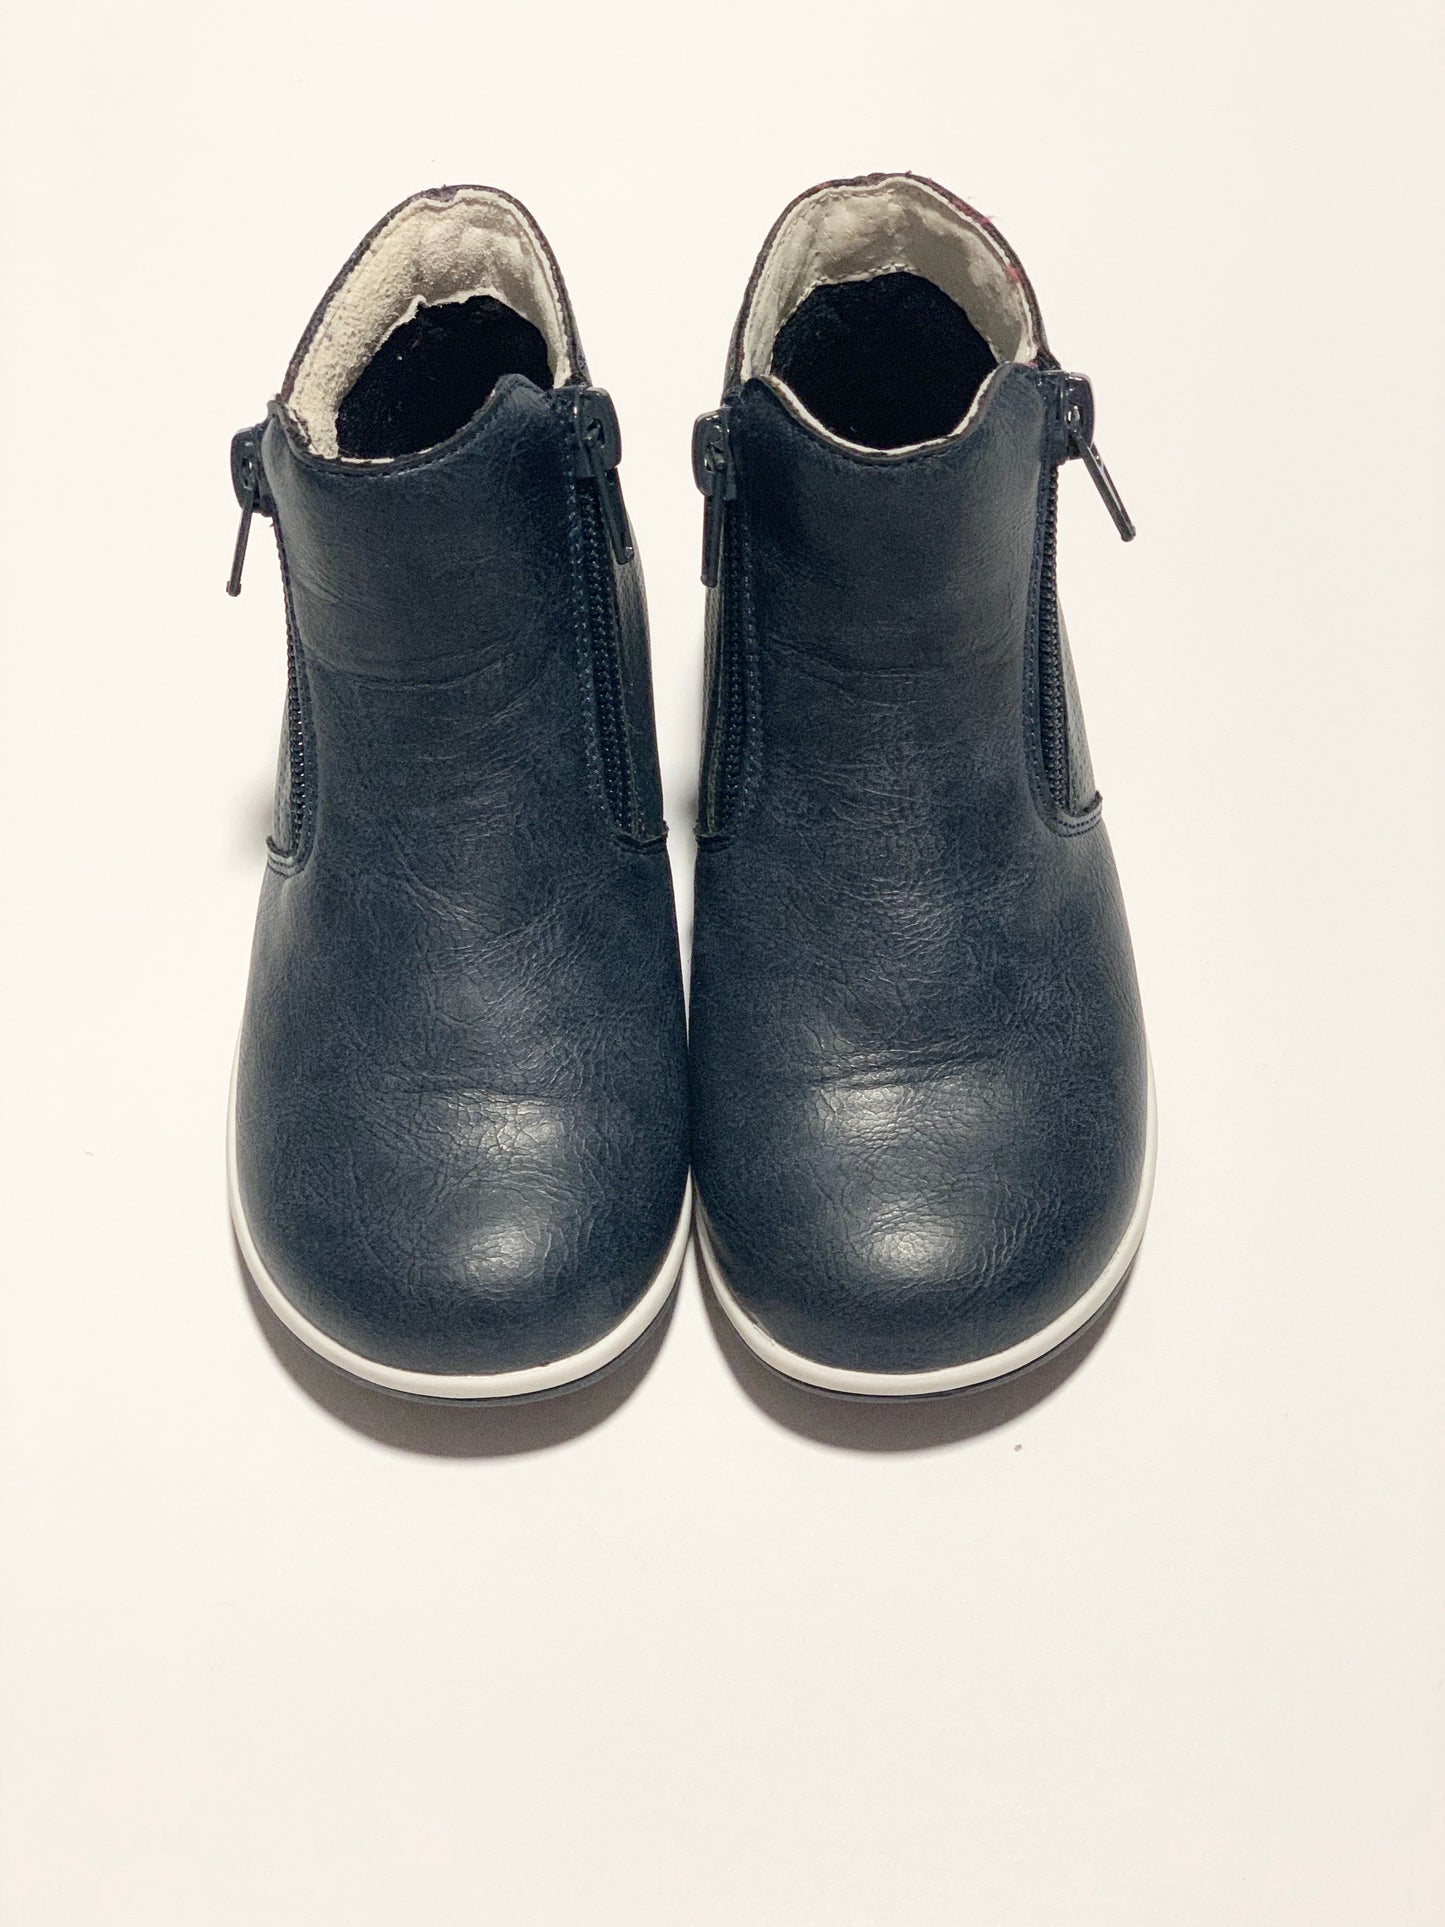 Navy boots - Size 9